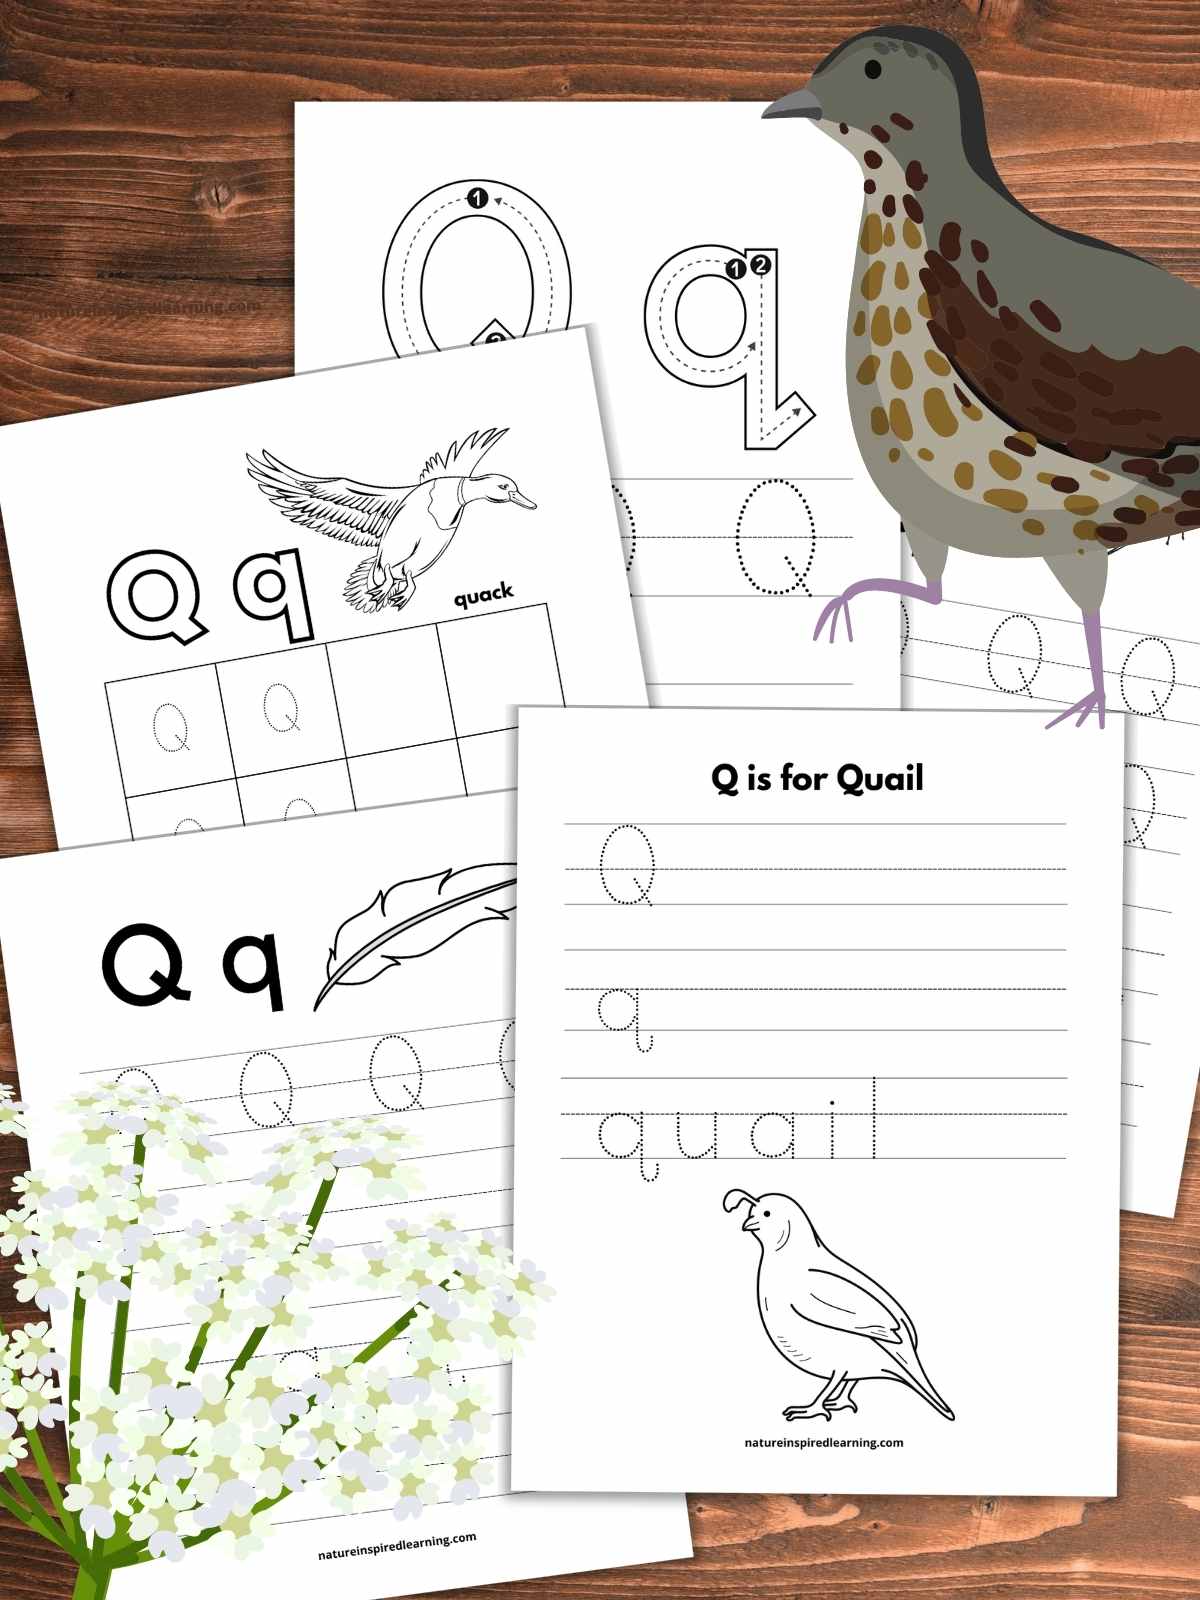 Five letter Q tracing worksheets overlapping on a wooden background with a quail upper right and queen Anne's lace bottom left.